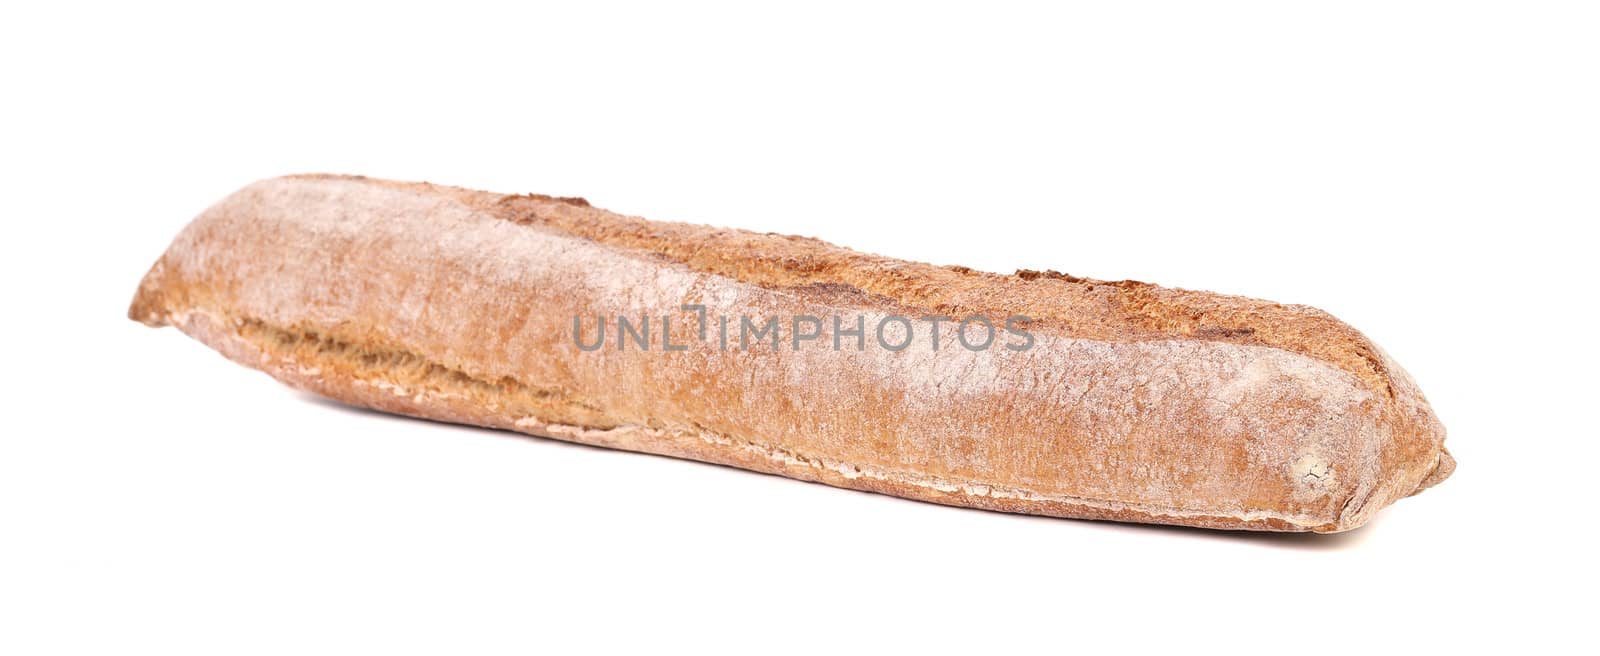 Crackling white bread. Isolated on a white background